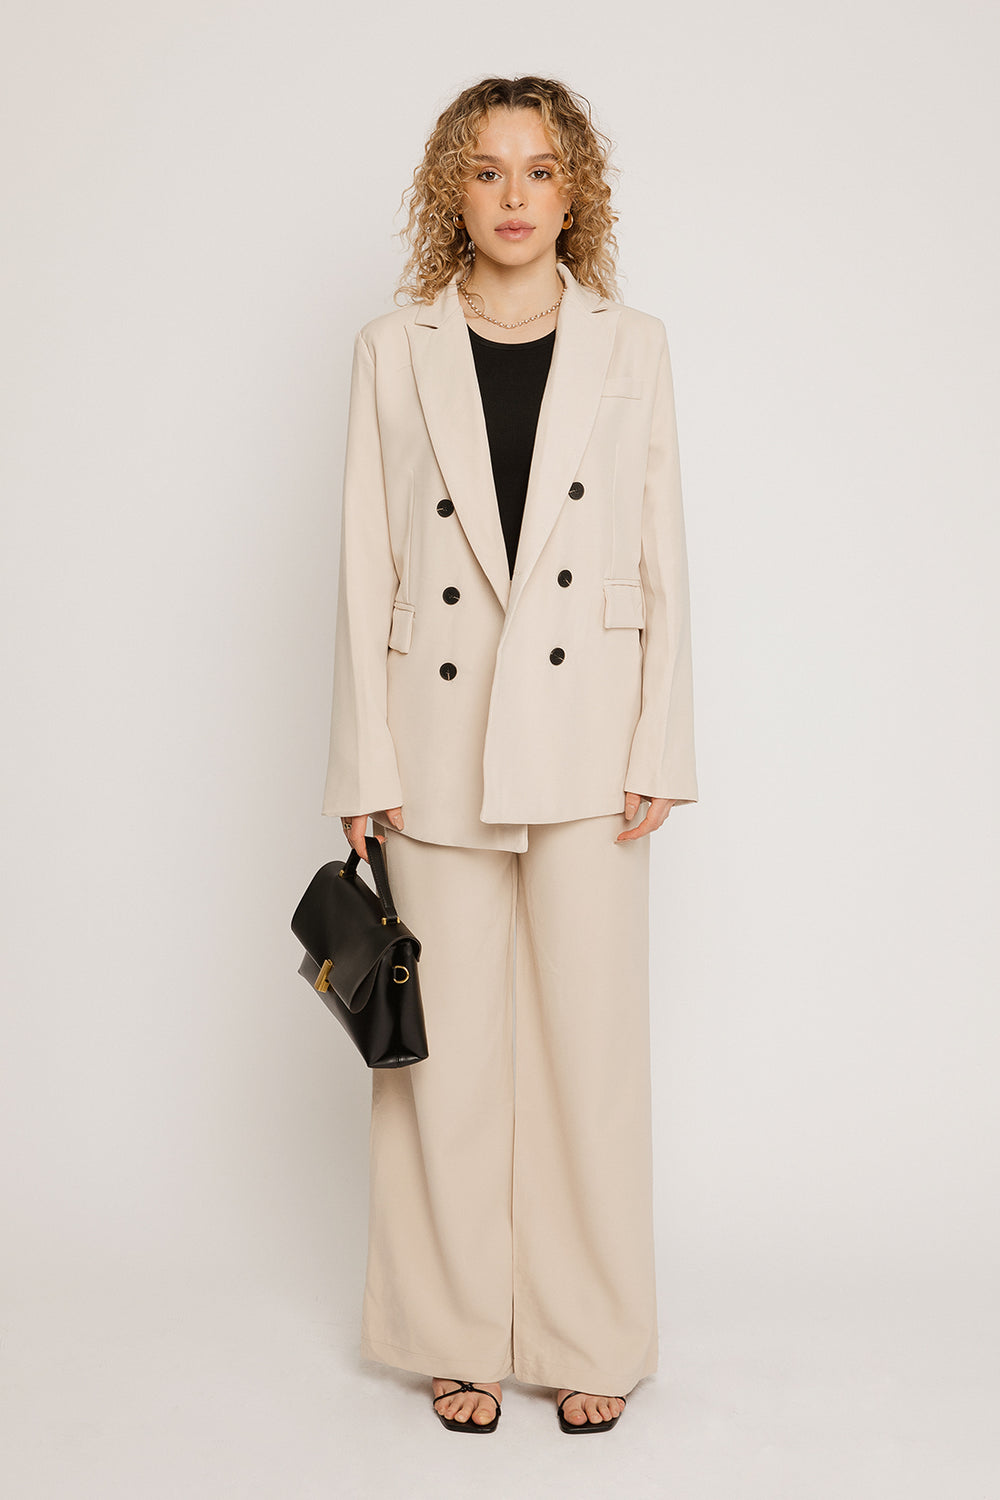 Everleigh Cream Suit Trousers - Sugar + Style